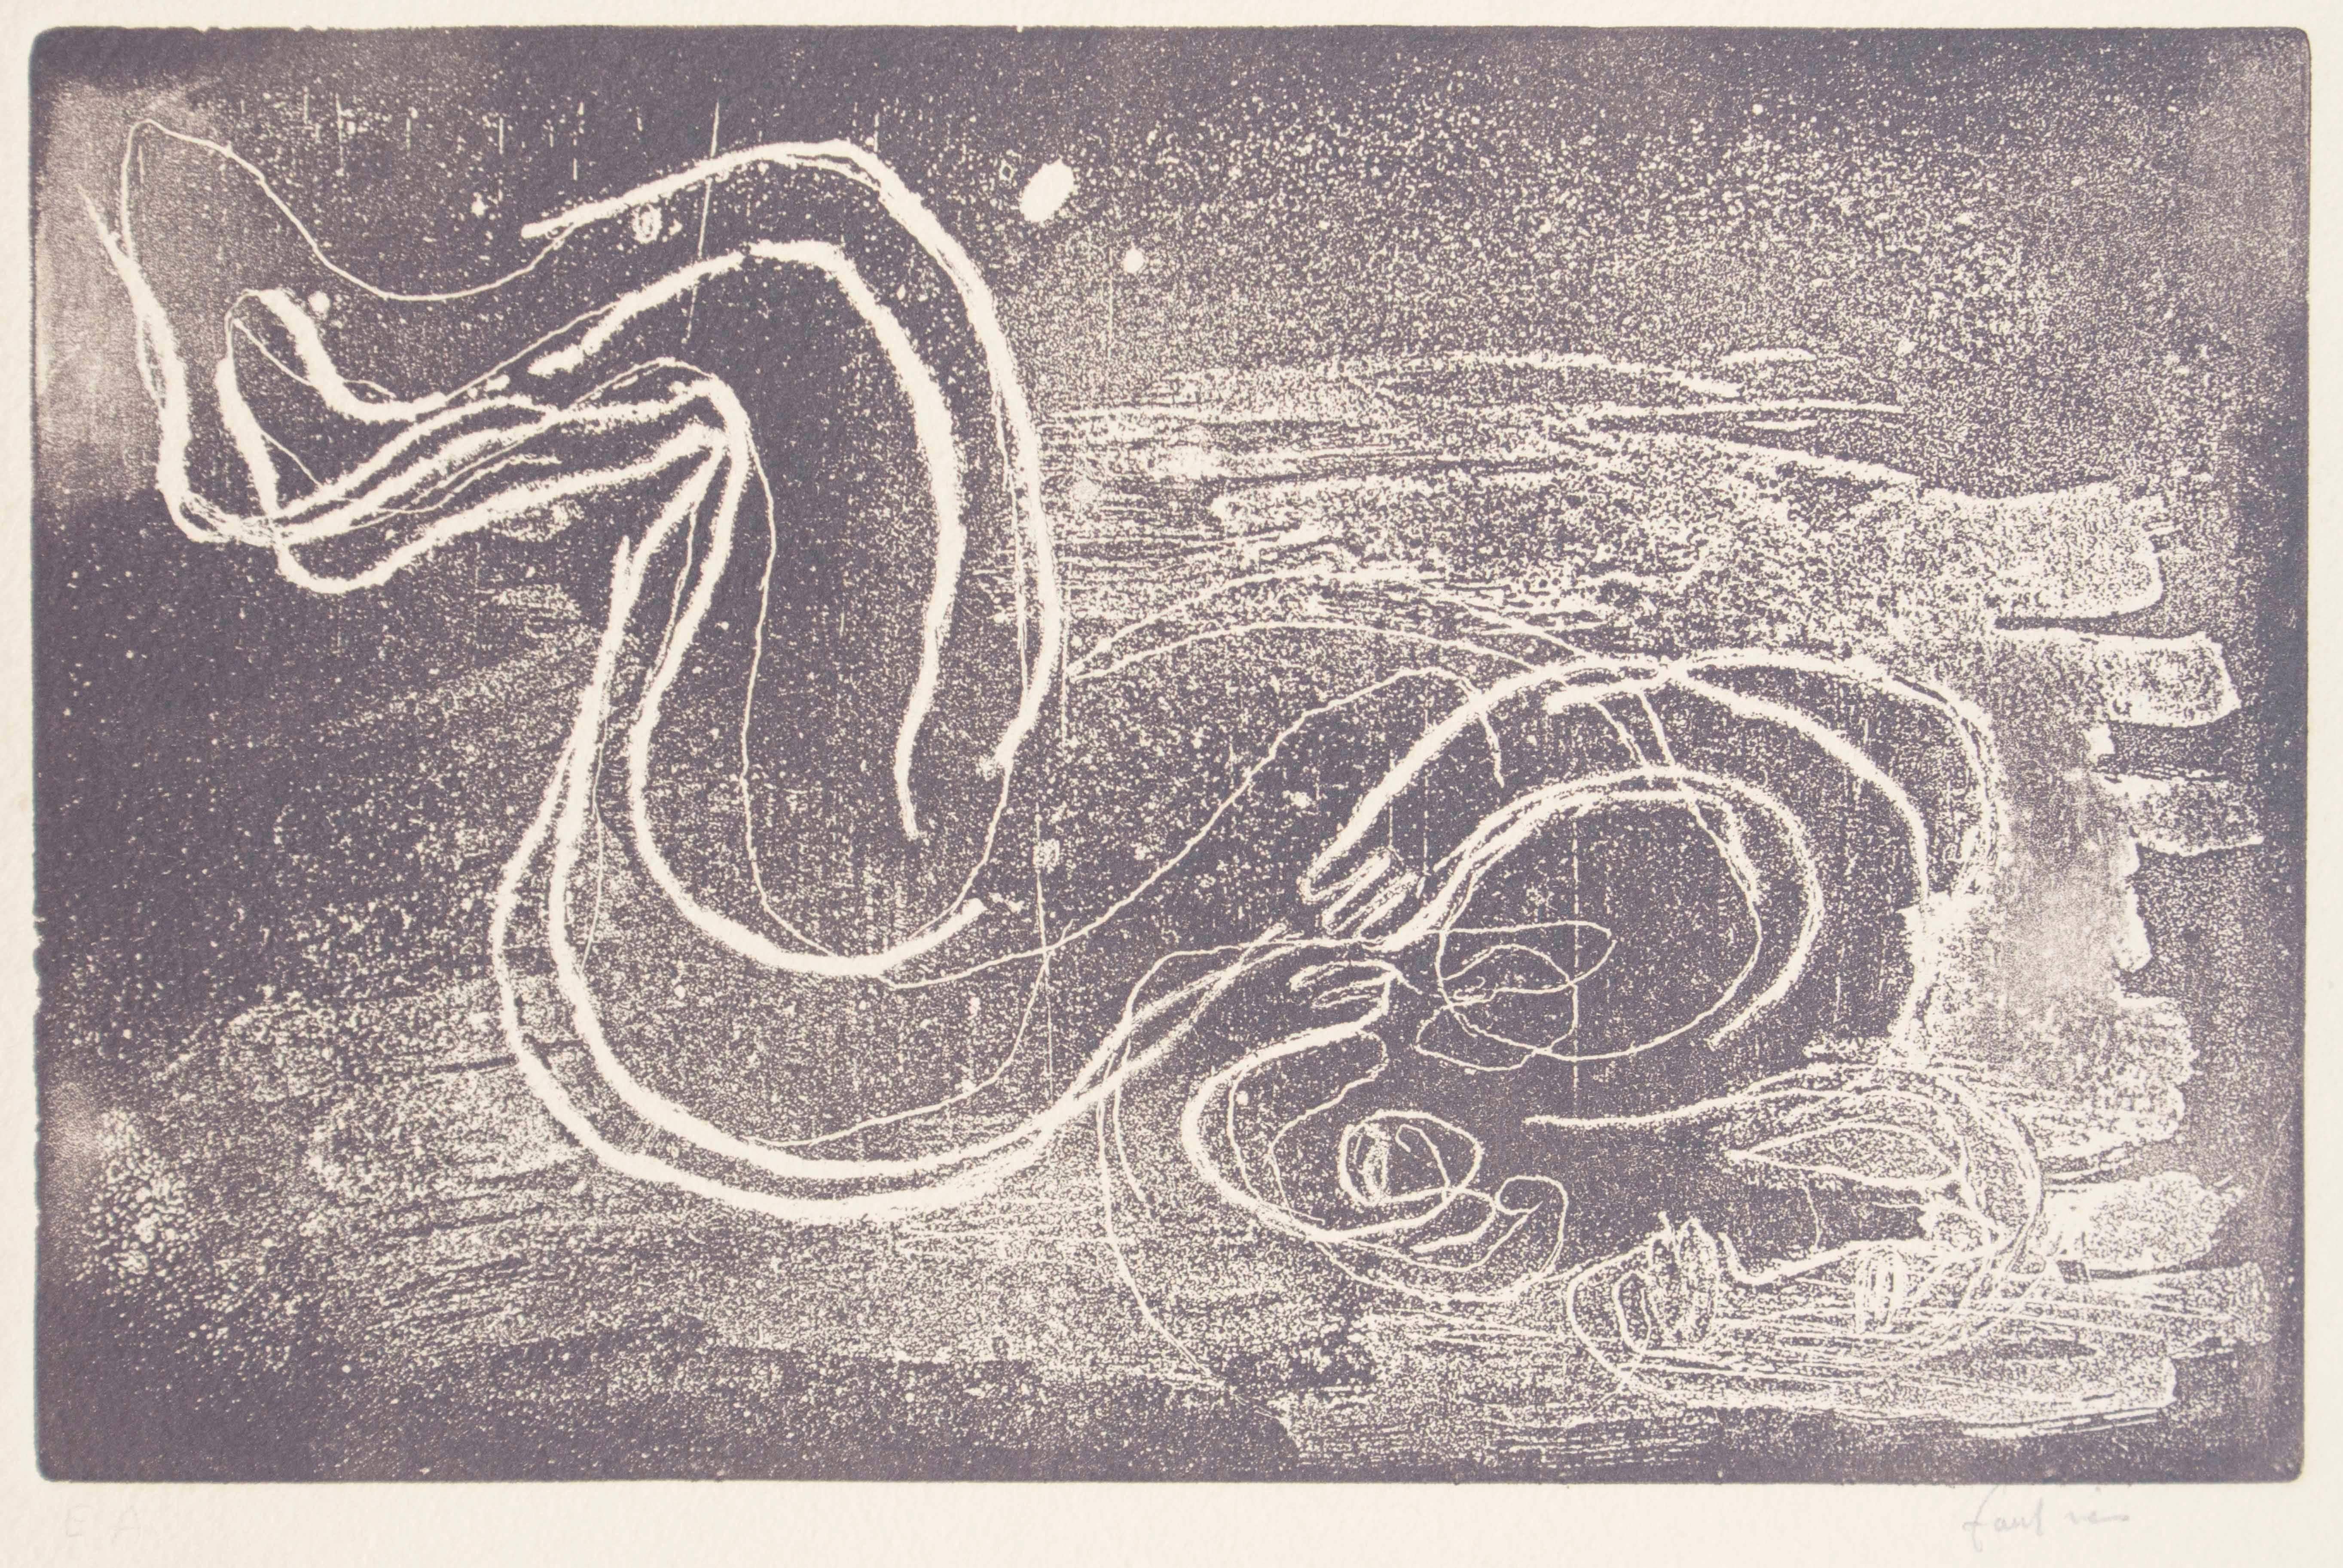 Nu - Etching by Jean Fautrier - 1941